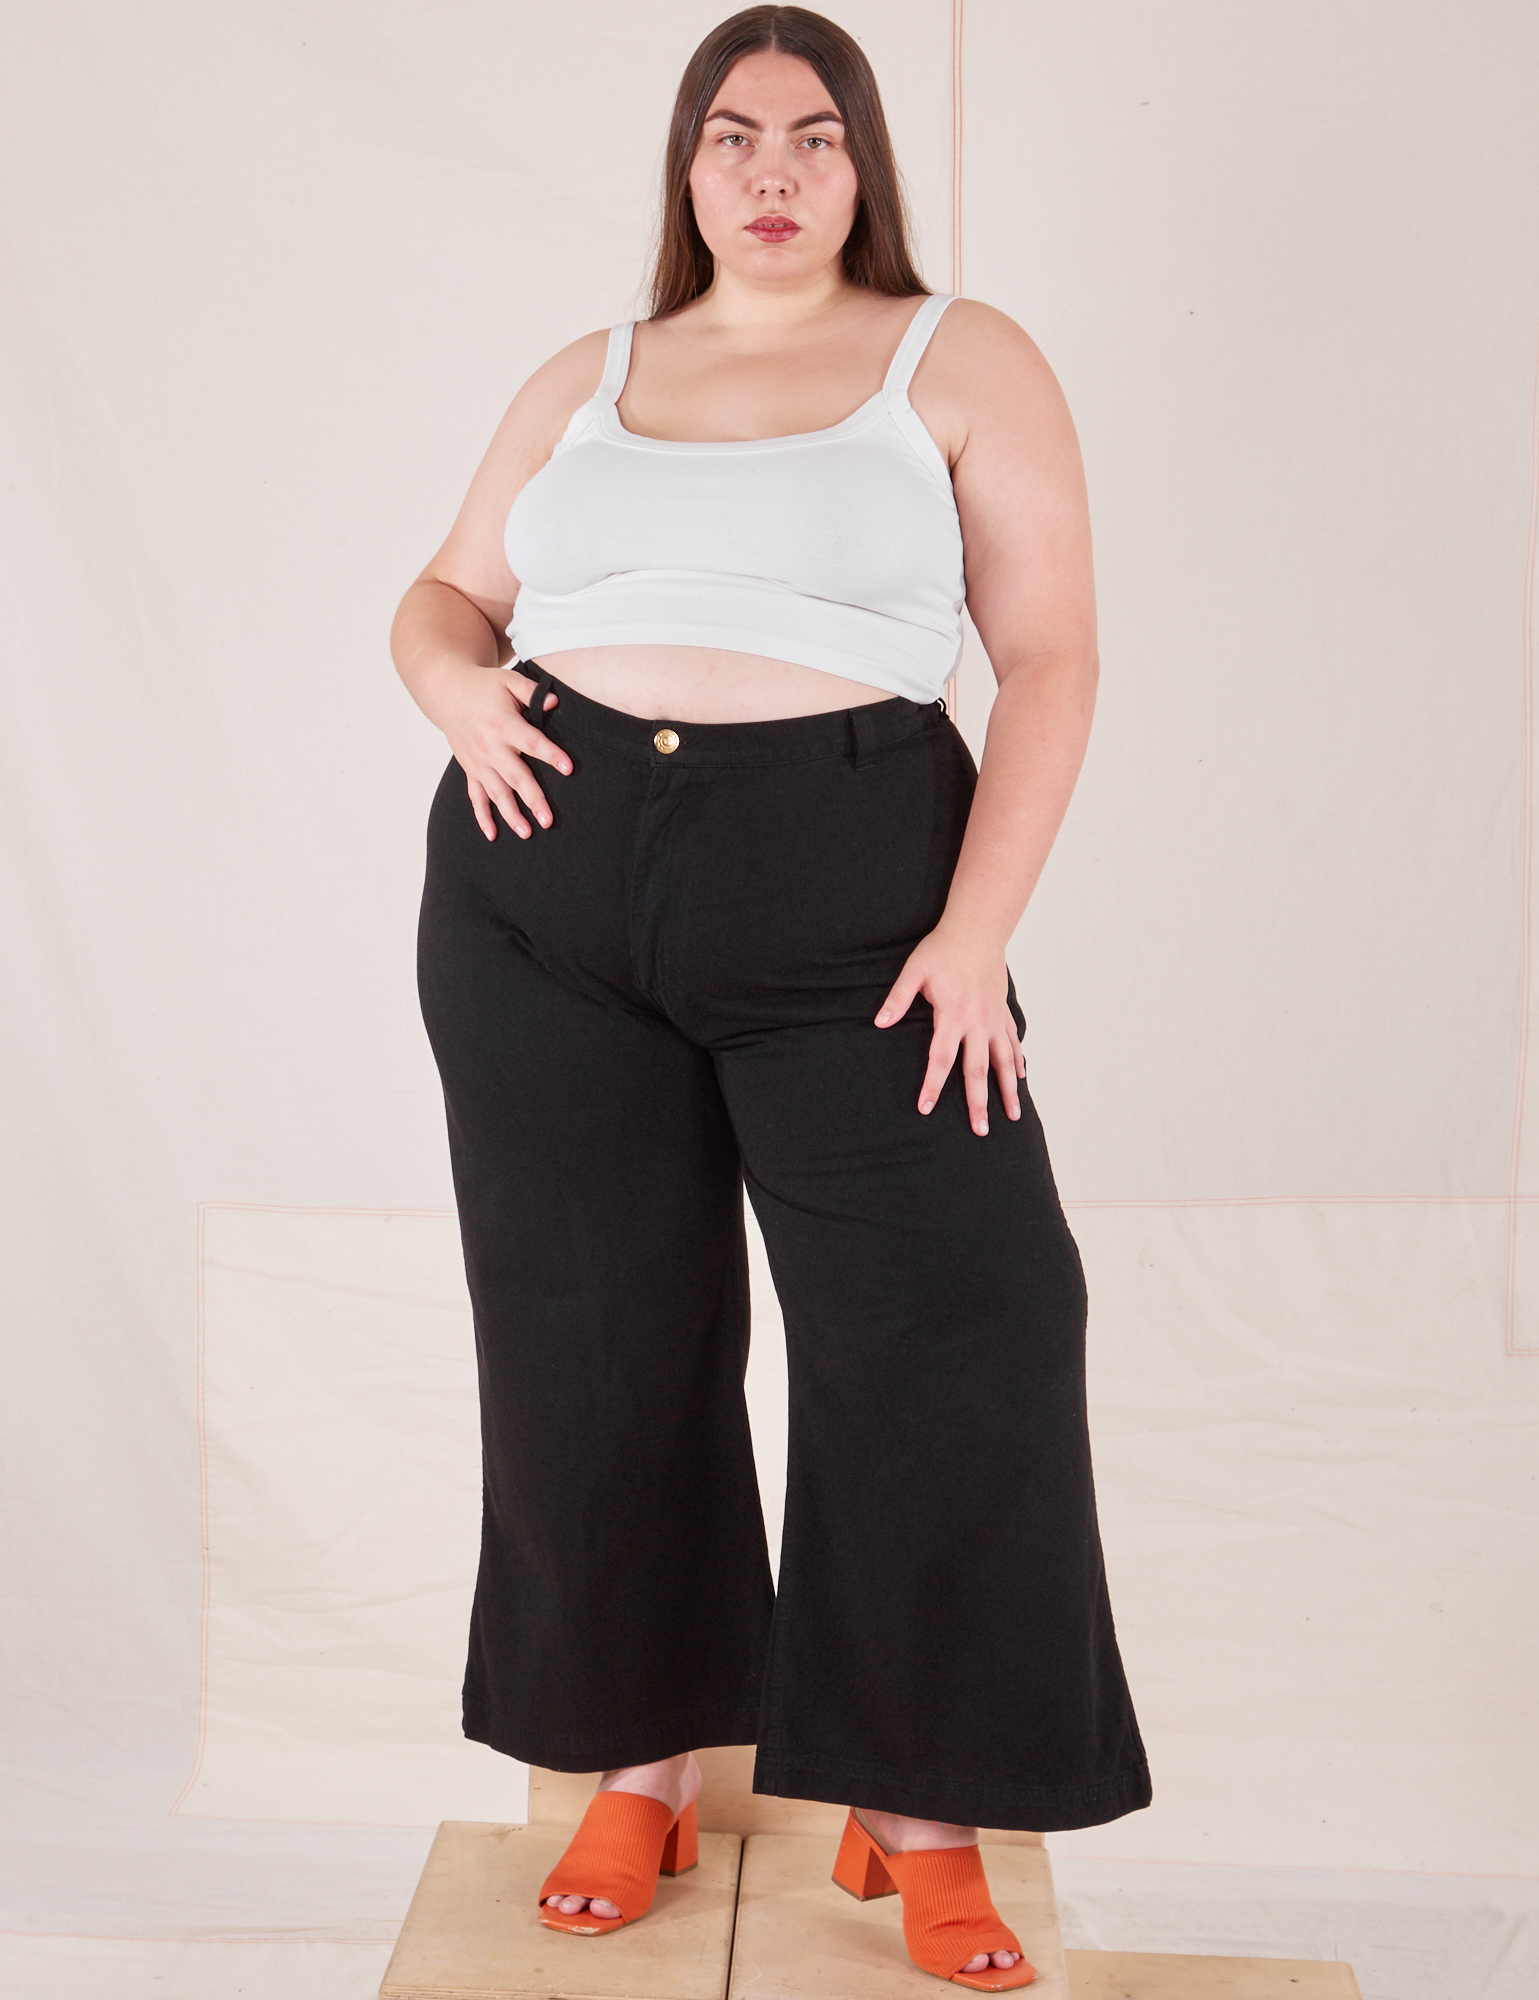 Marielena is 5'8" and wearing 2XL Bell Bottoms in Basic Black paired with vintage off-white Cami